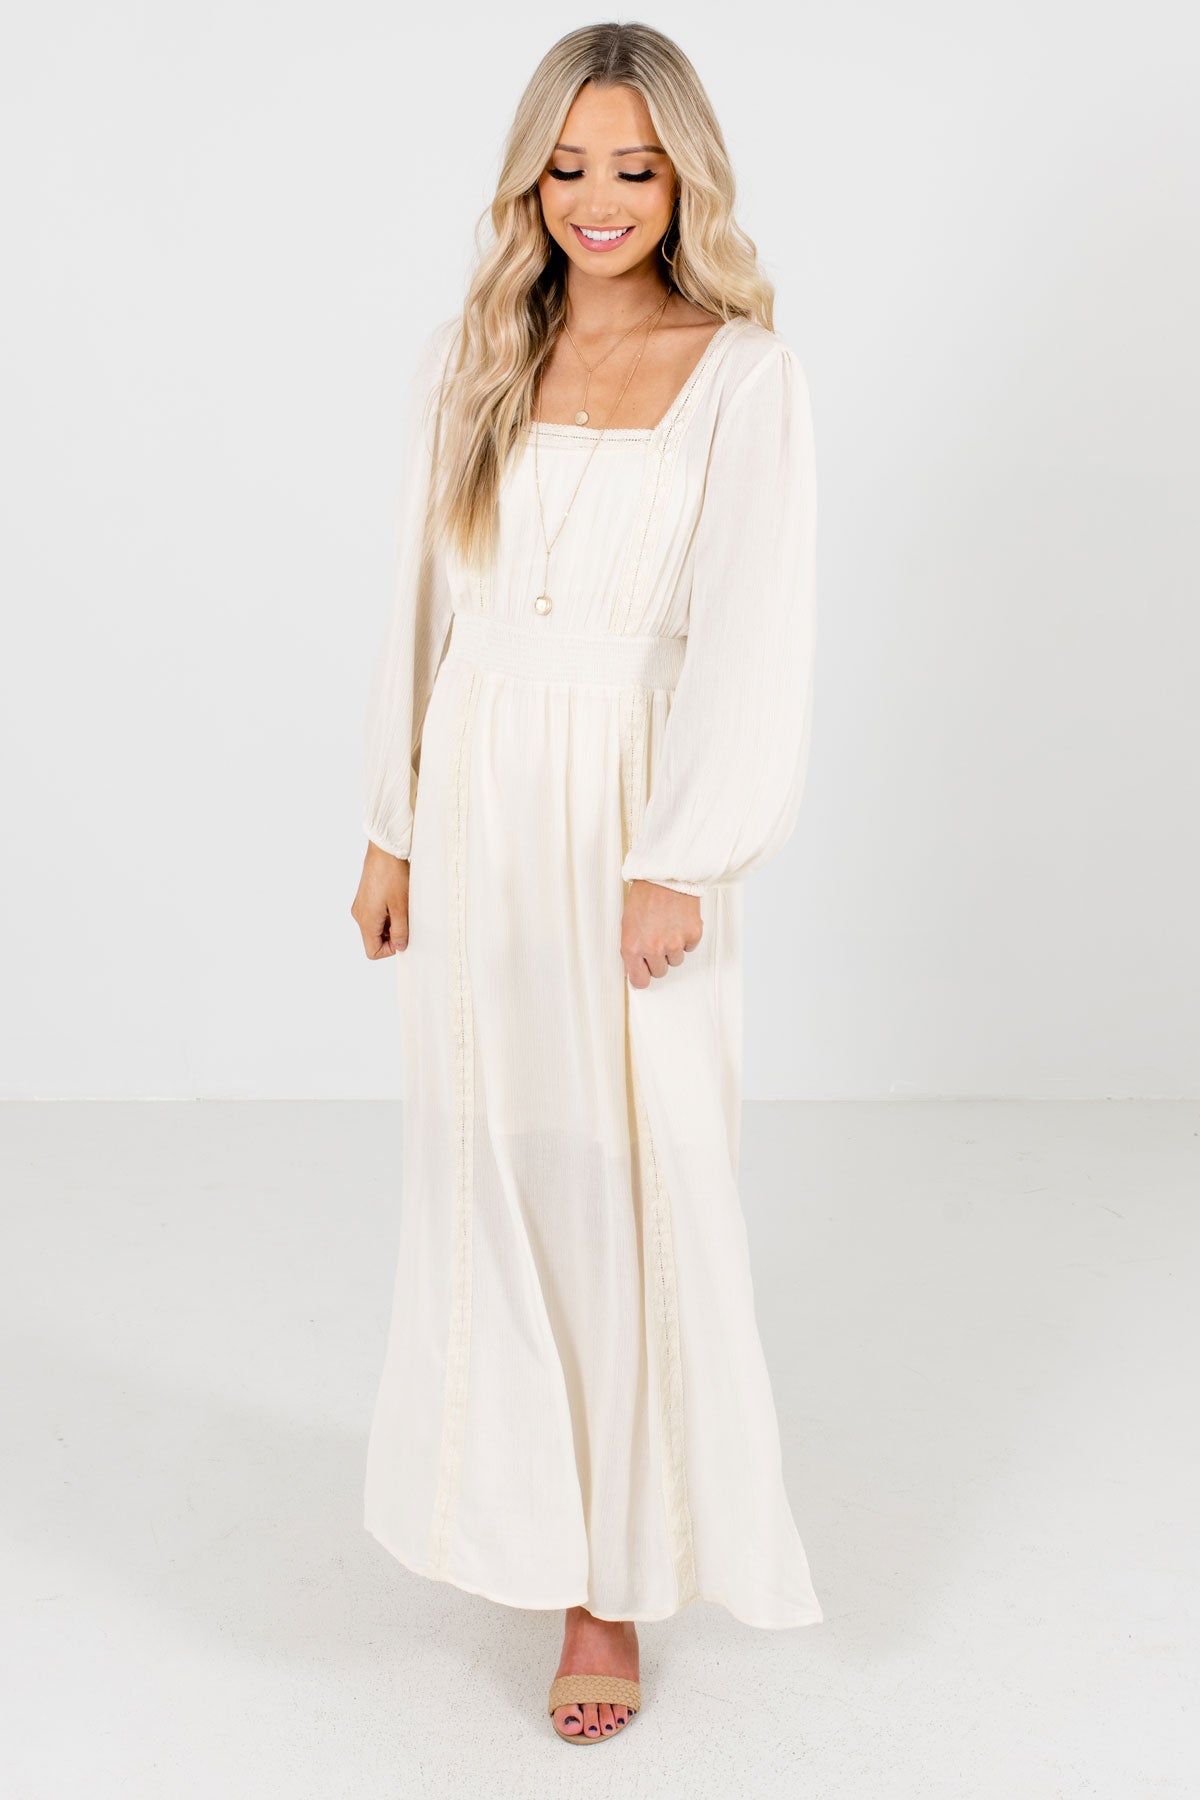 Cream Cute and Comfortable Boutique Maxi Dresses for Women